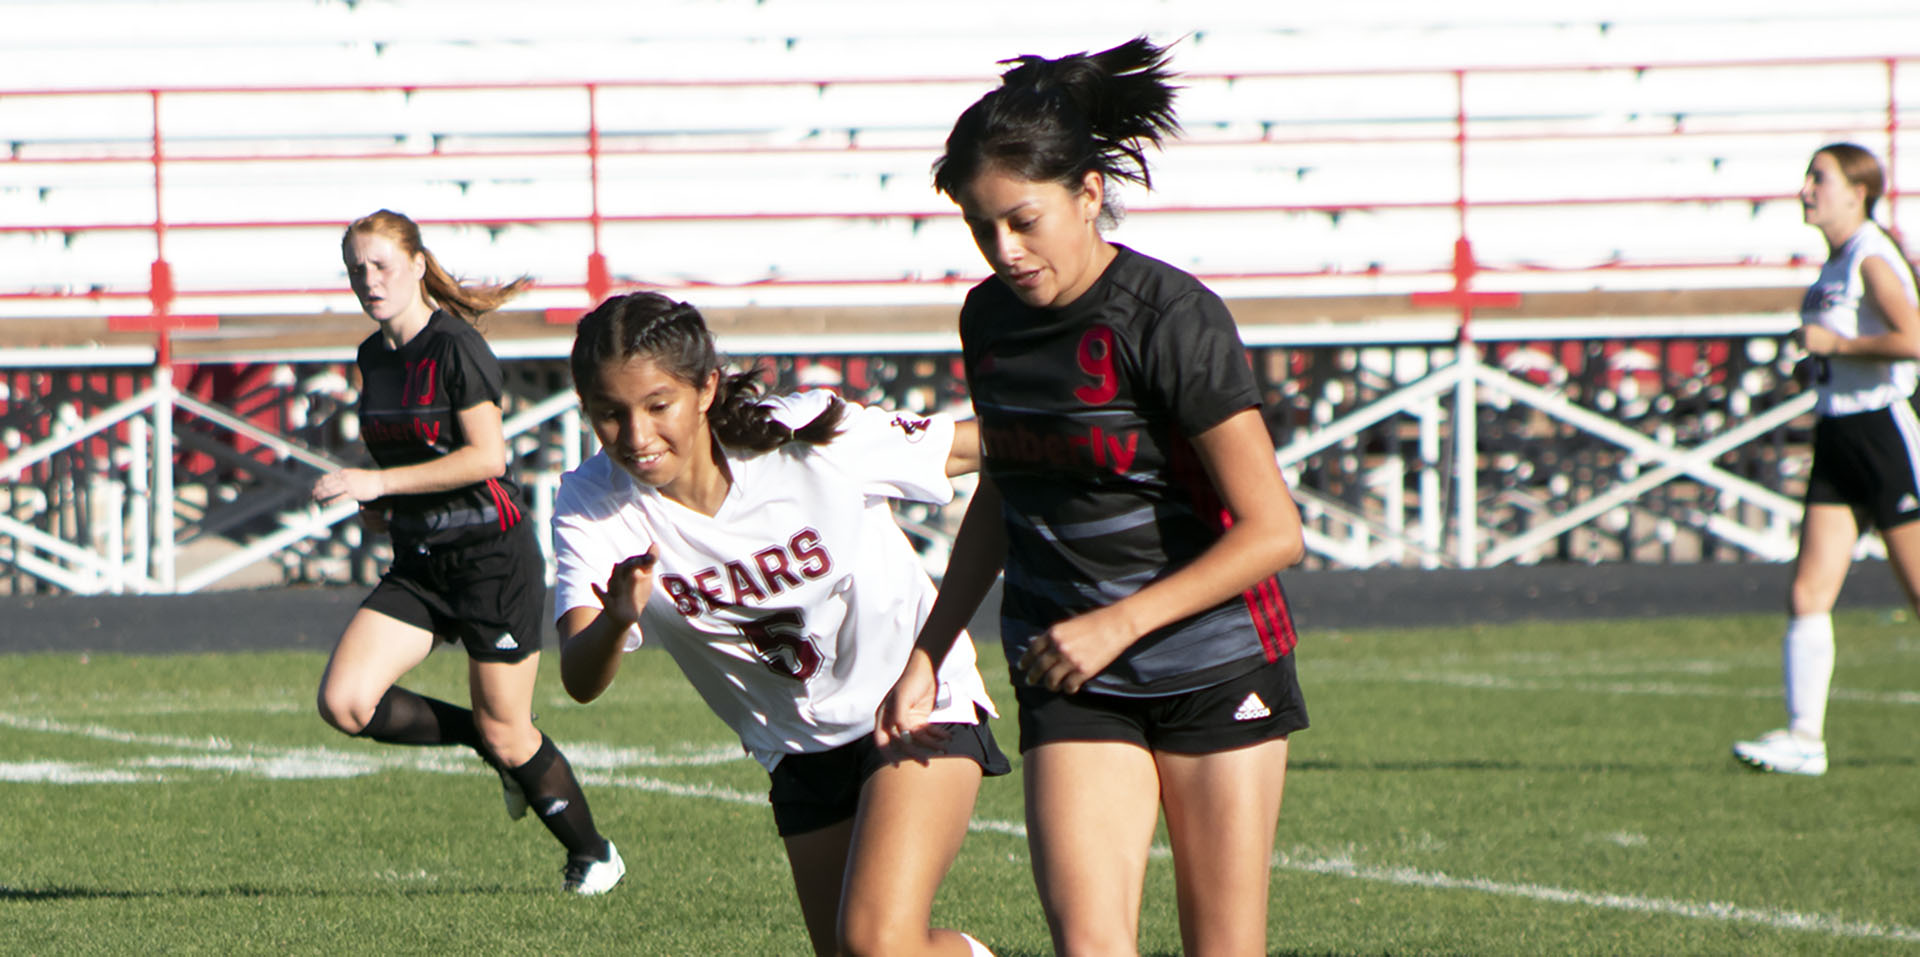 Senior Monse Torres moves the ball down the field during a game against Bliss. | Photo by Talan Volkel